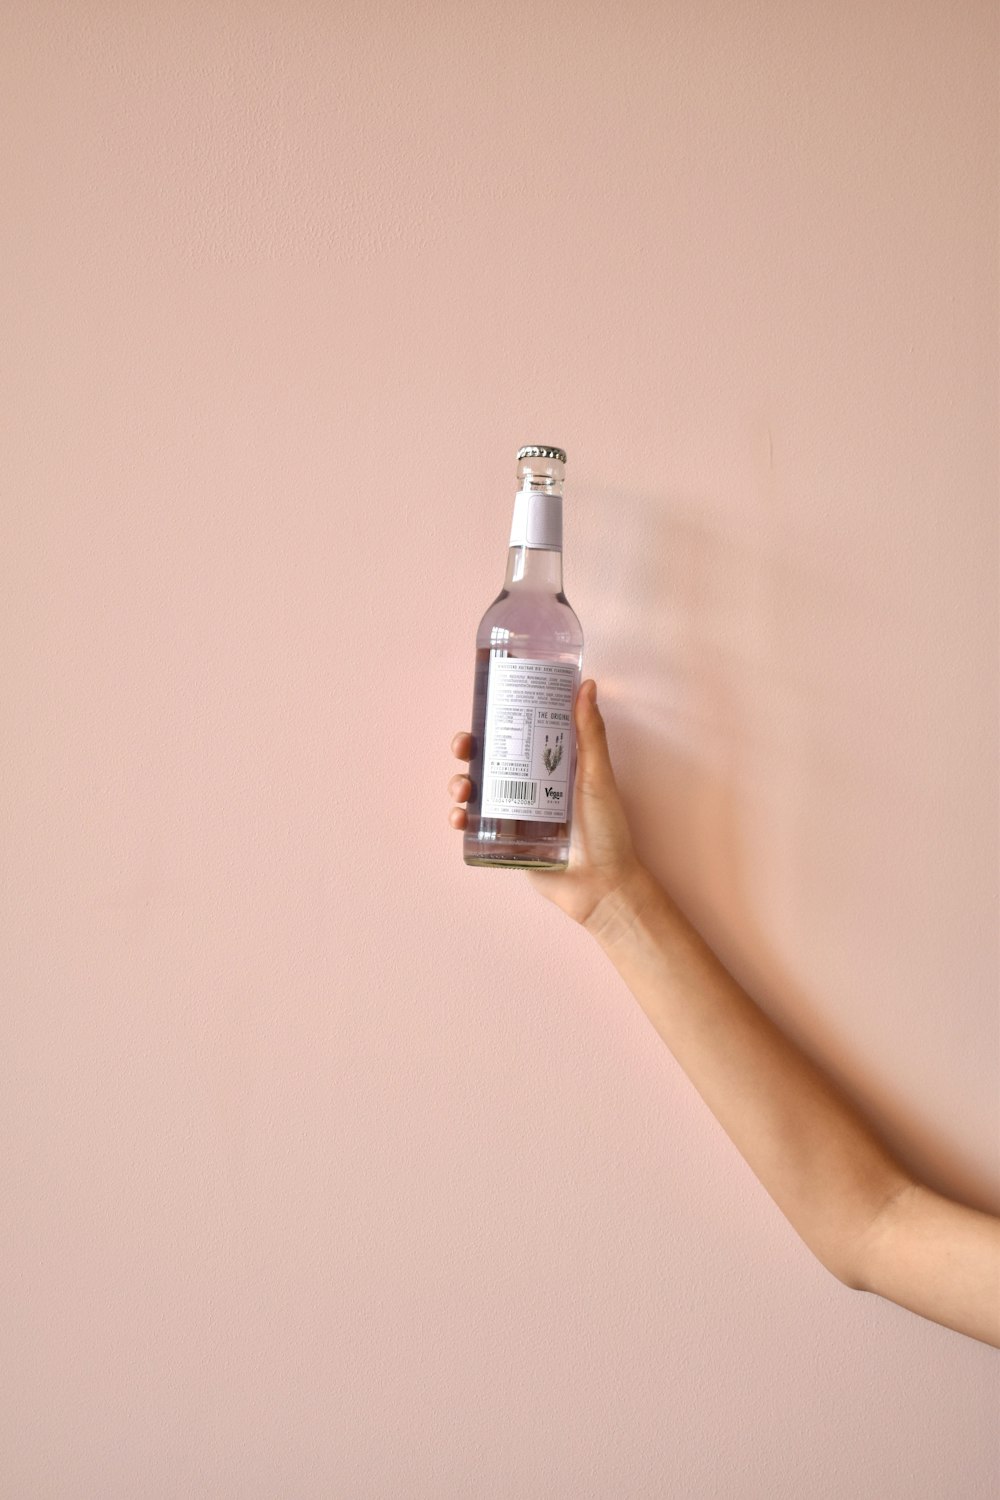 a hand holding a bottle of water against a pink wall